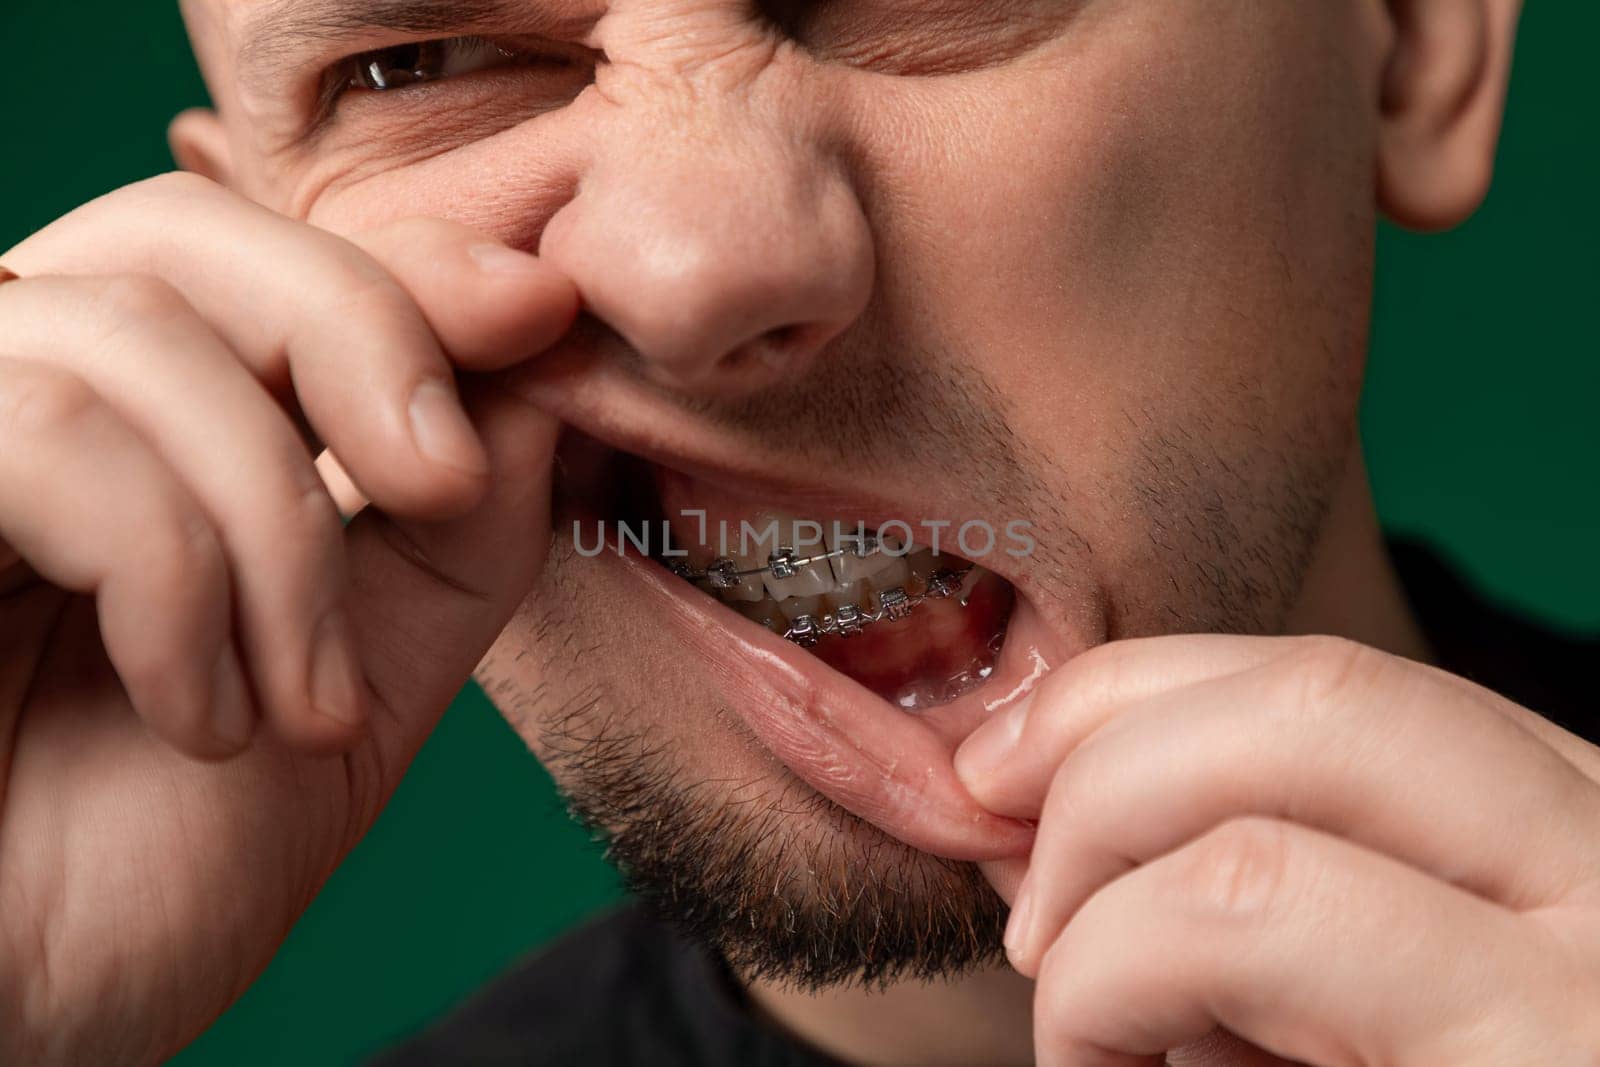 Man With Braces Holding Thumb to Mouth by TRMK